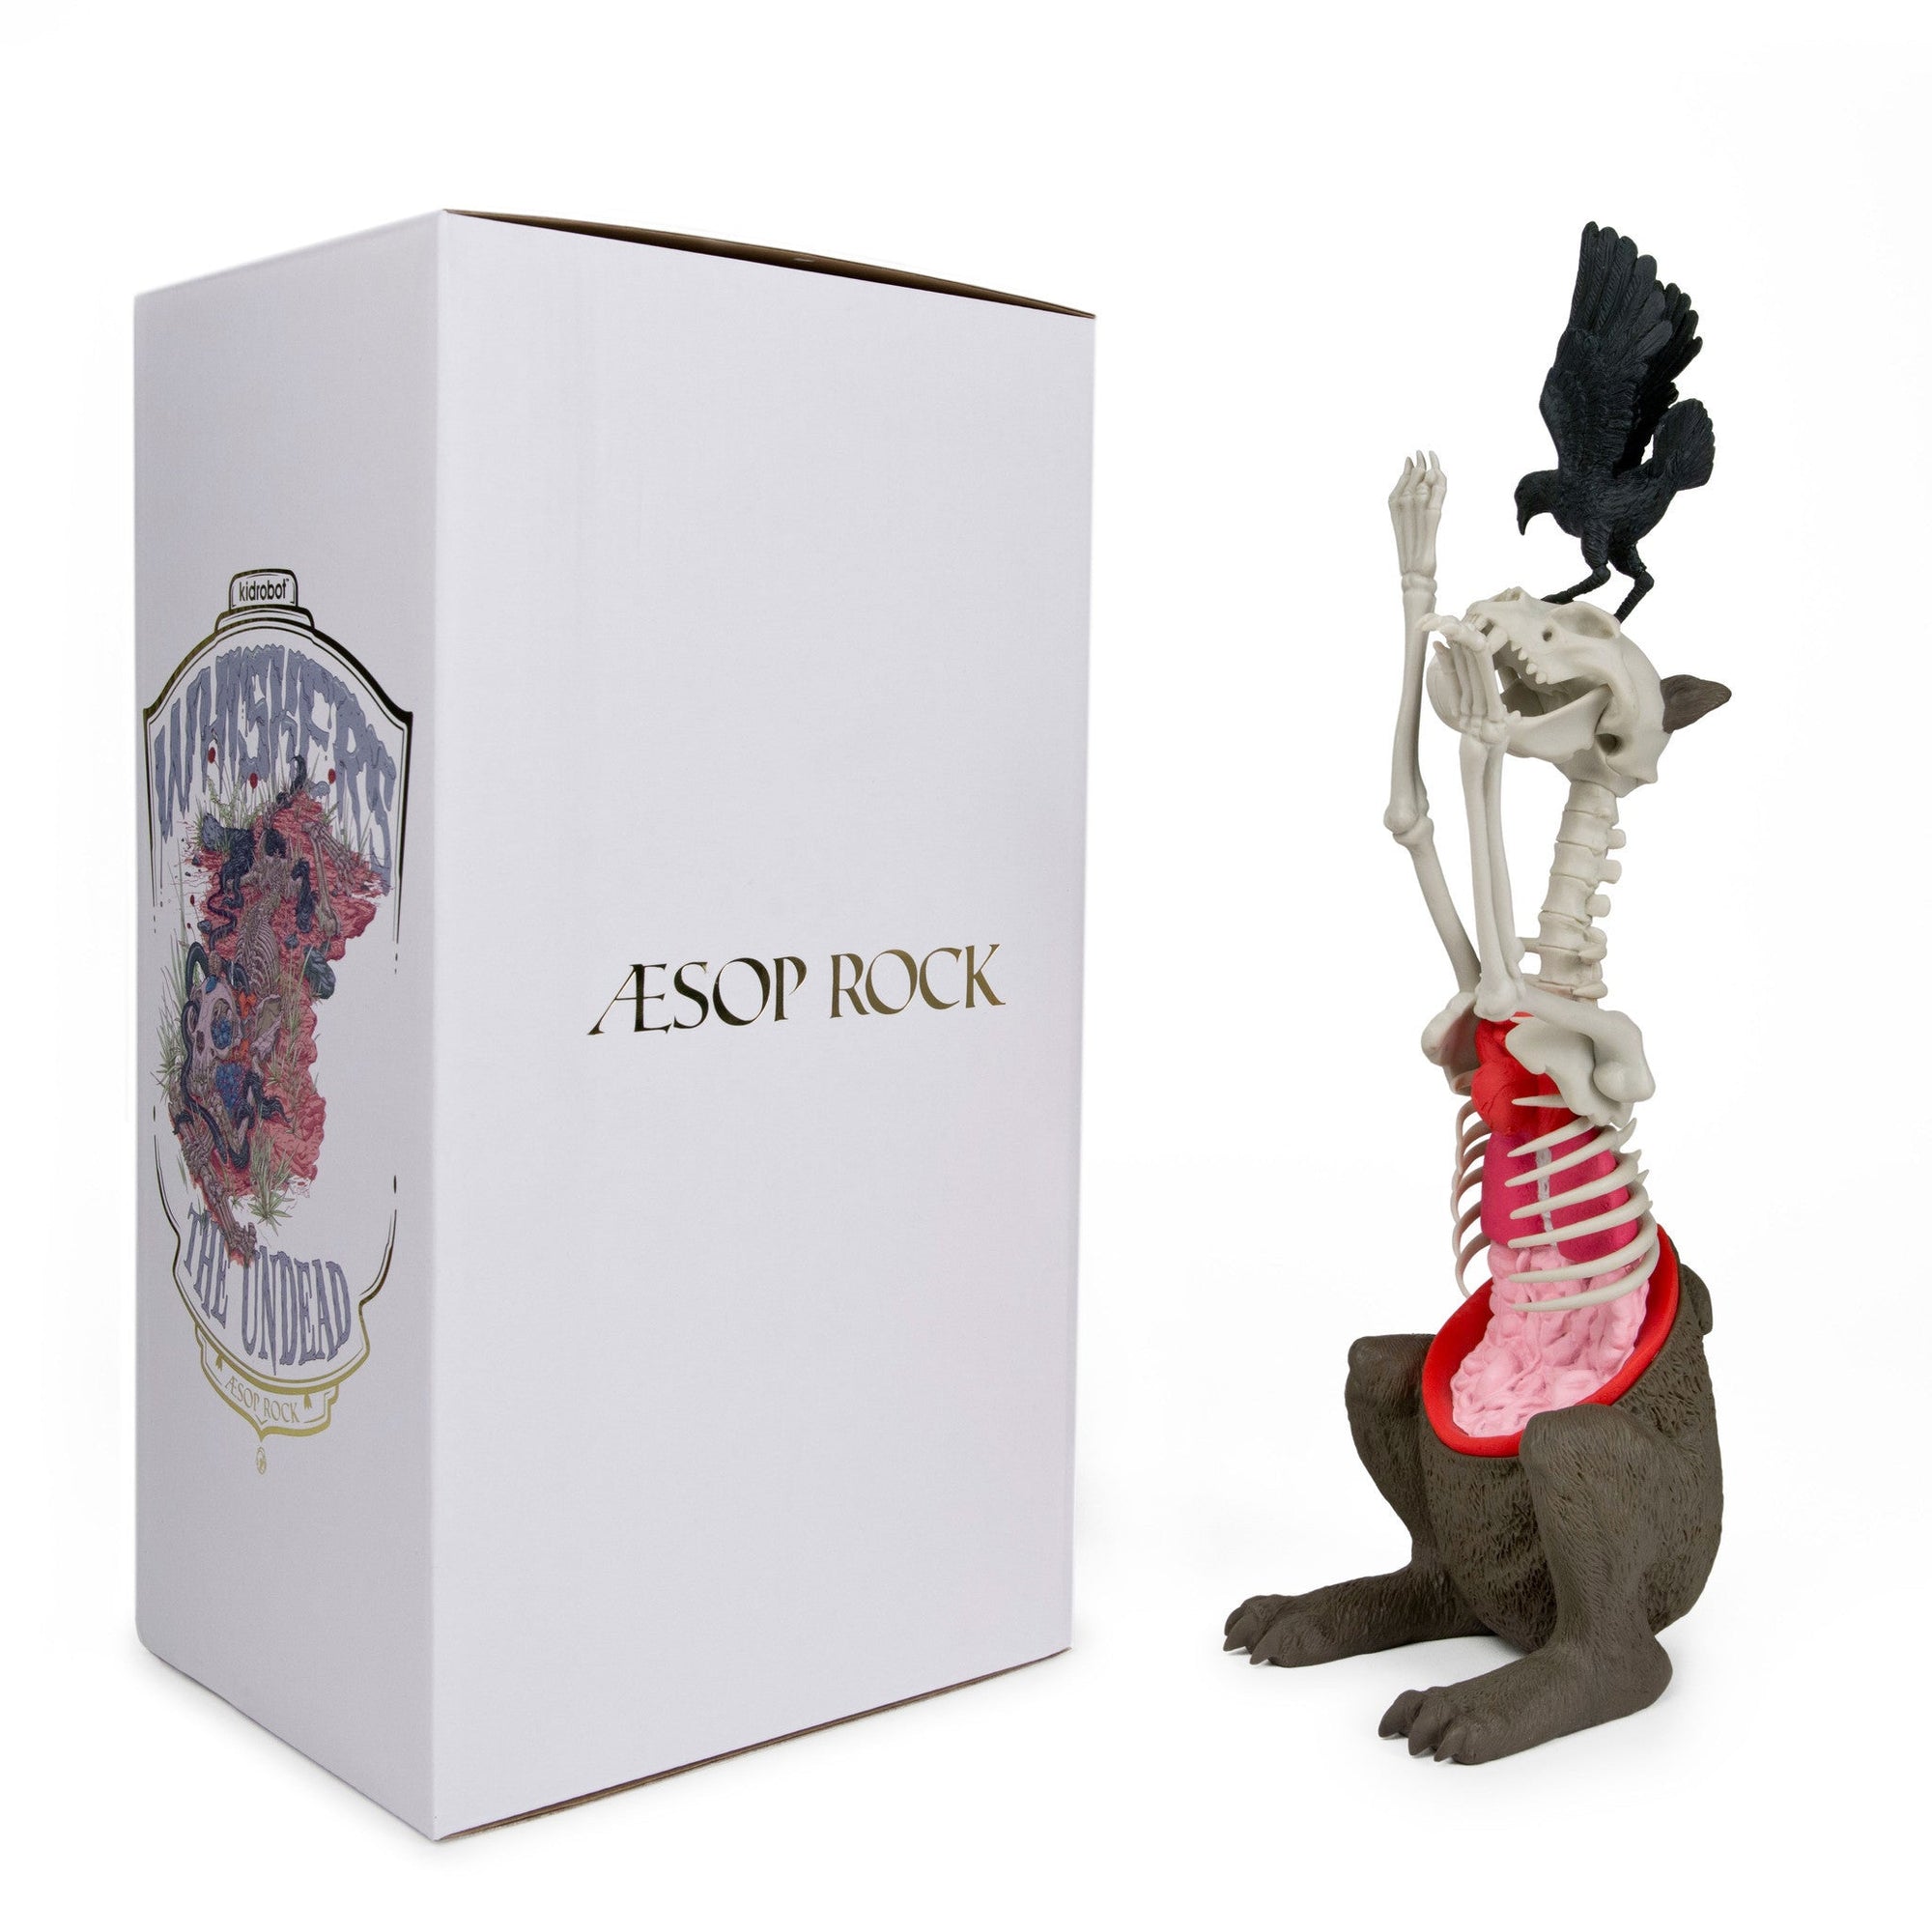 Whiskers the Undead by Aesop Rock x Kidrobot - Mindzai  - 1